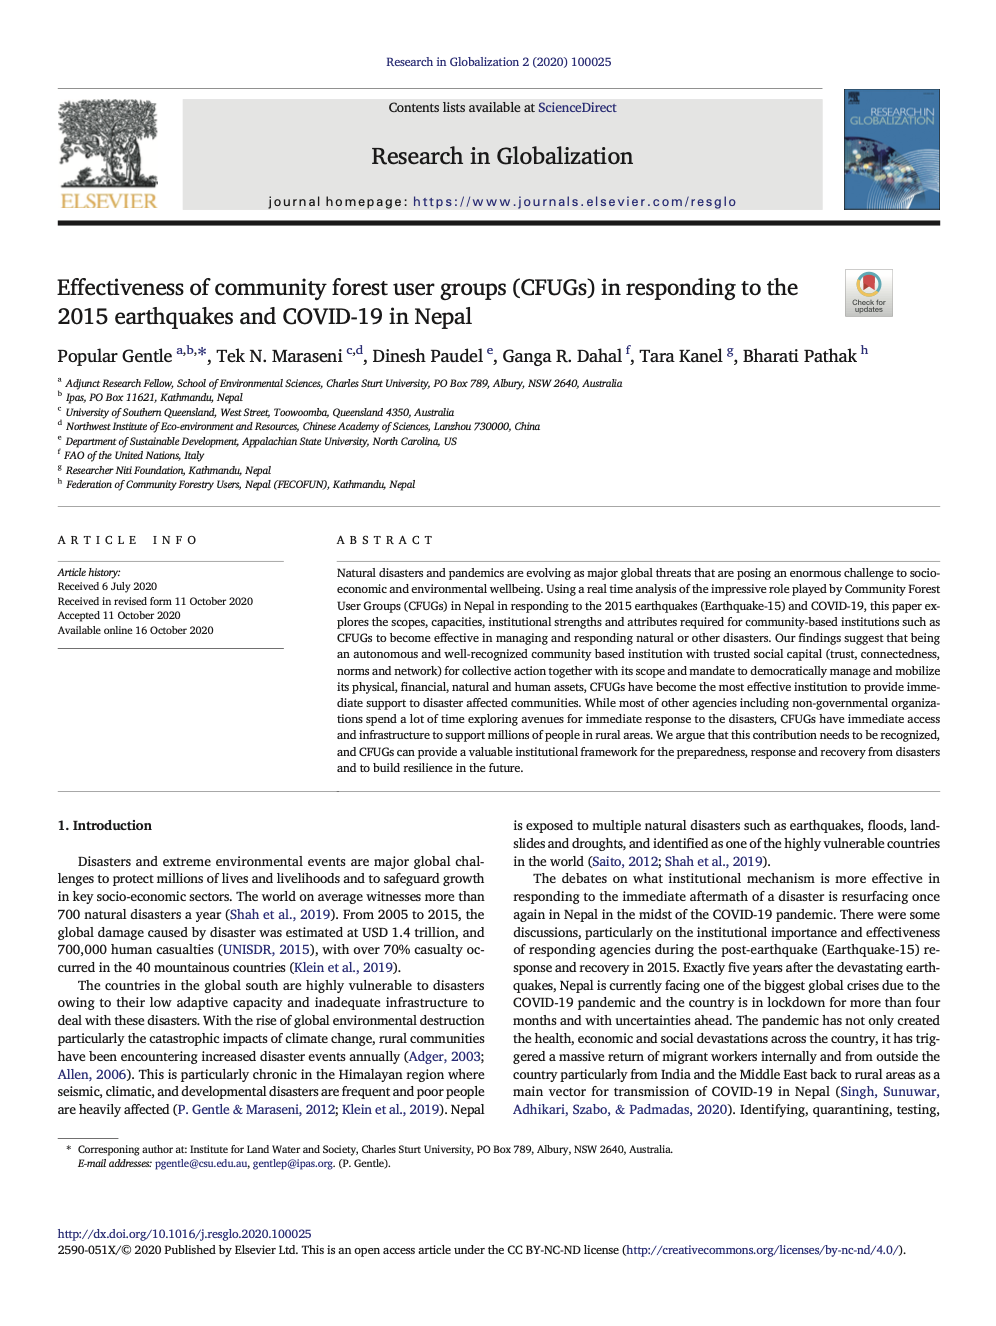 Effectiveness of community forest user groups (CFUGs) in responding to the 2015 earthquakes and COVI